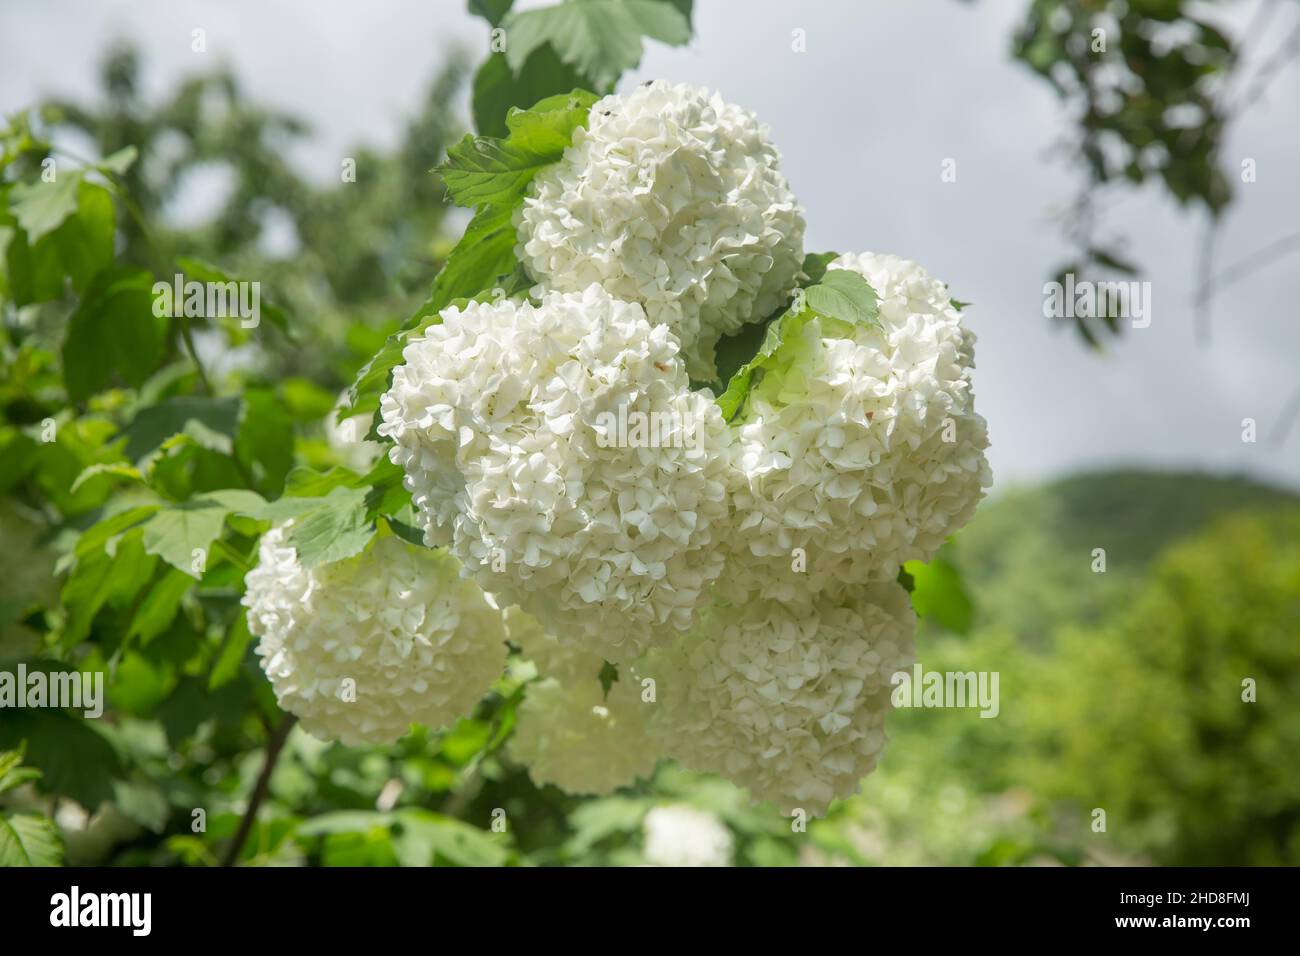 Hydran High Resolution Stock Photography and Images - Alamy